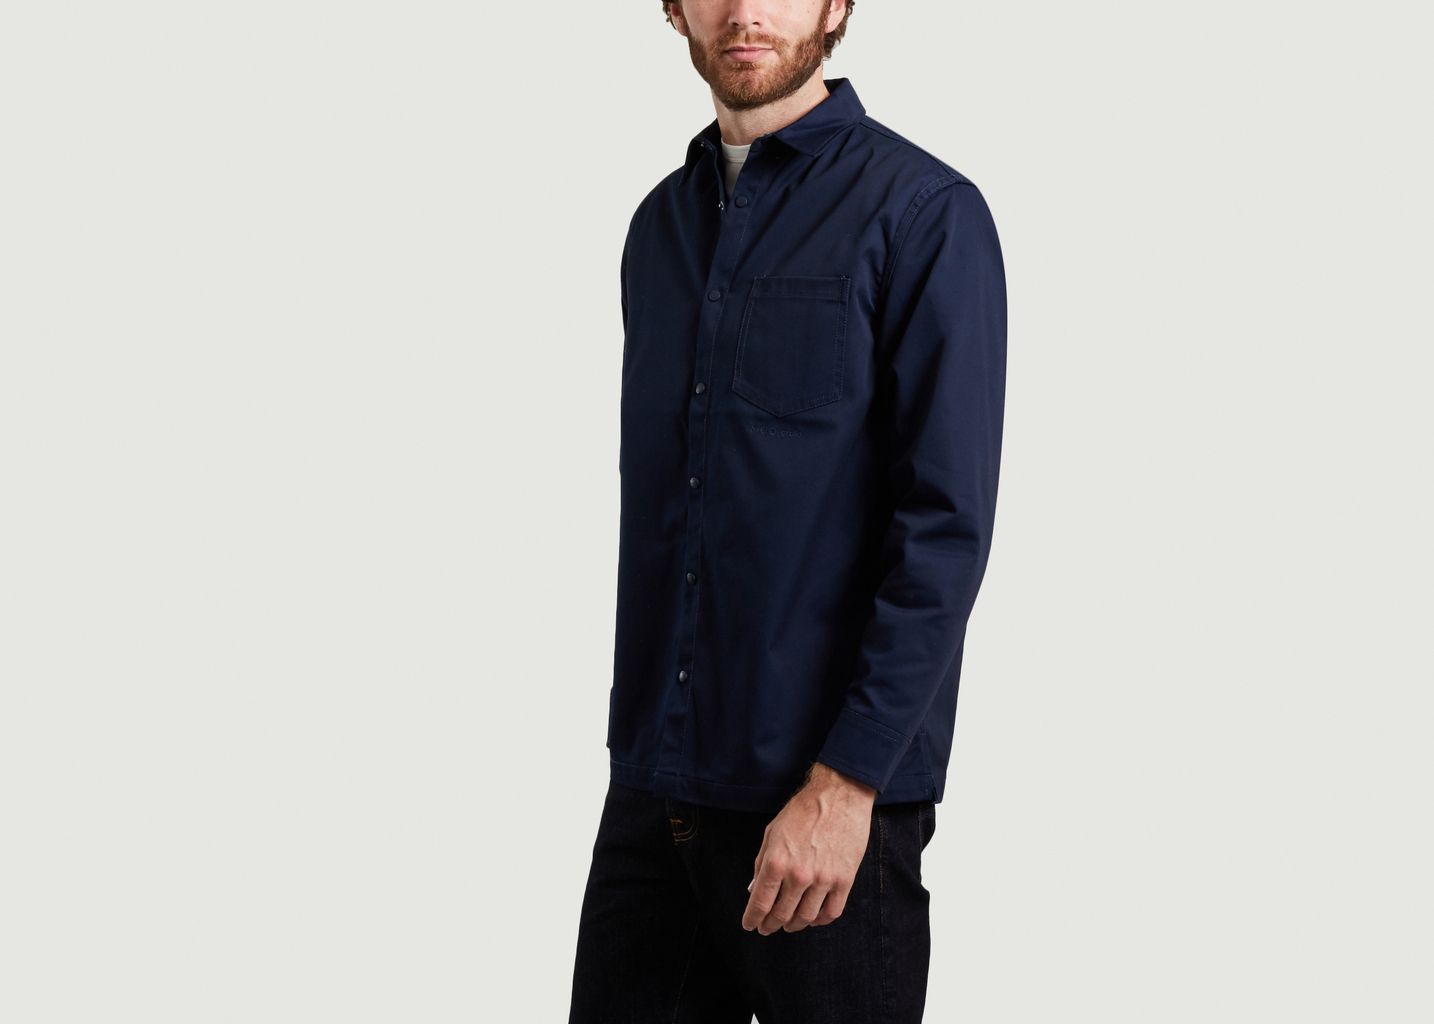 Oversize shirt with pocket - M.C. Overalls